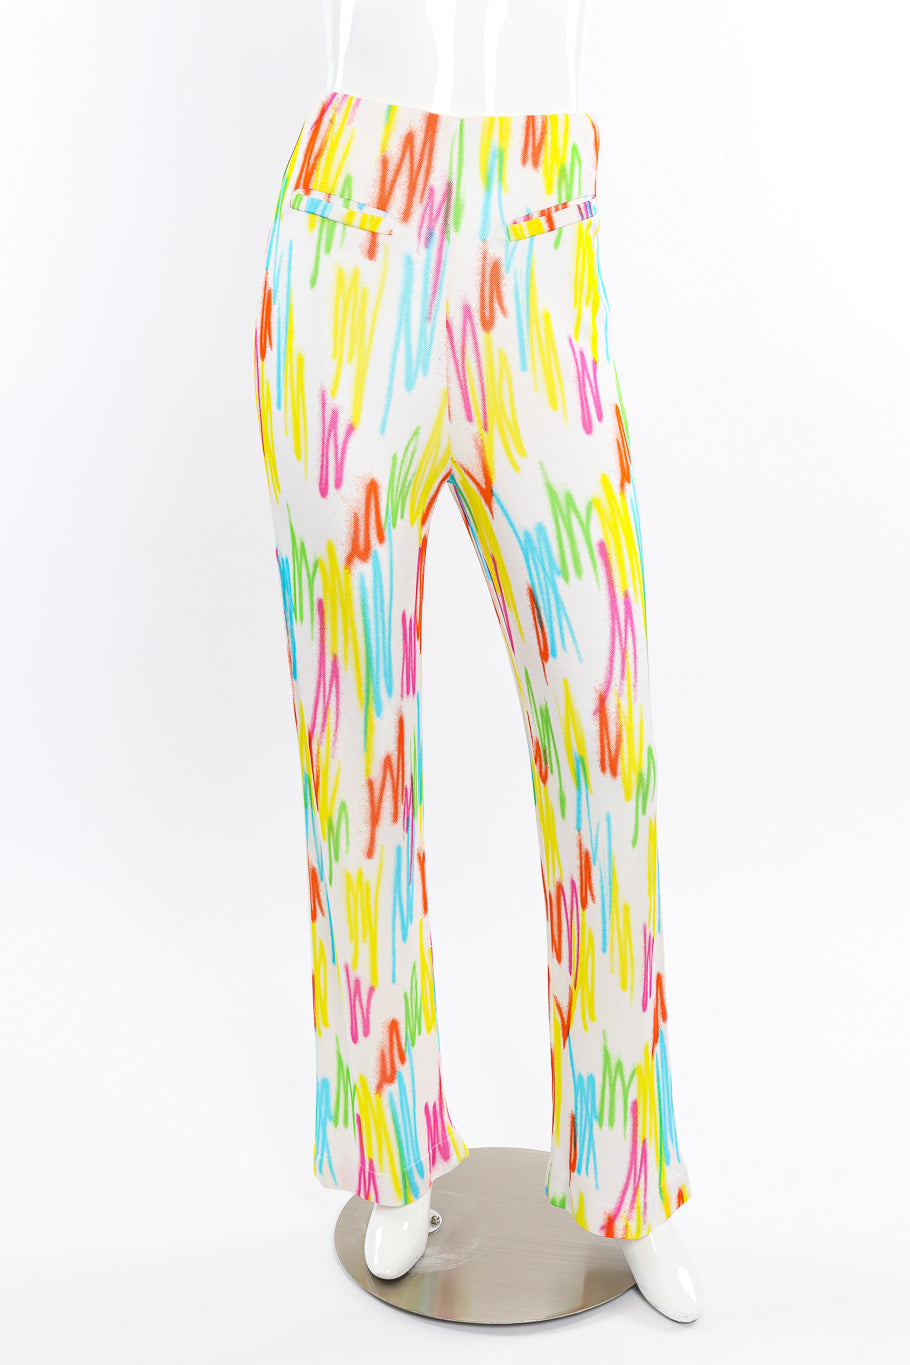 Vintage Gianni Versace 1996 SS Neon Scribble Top and Pant Set front view of pant on mannequin @Recessla